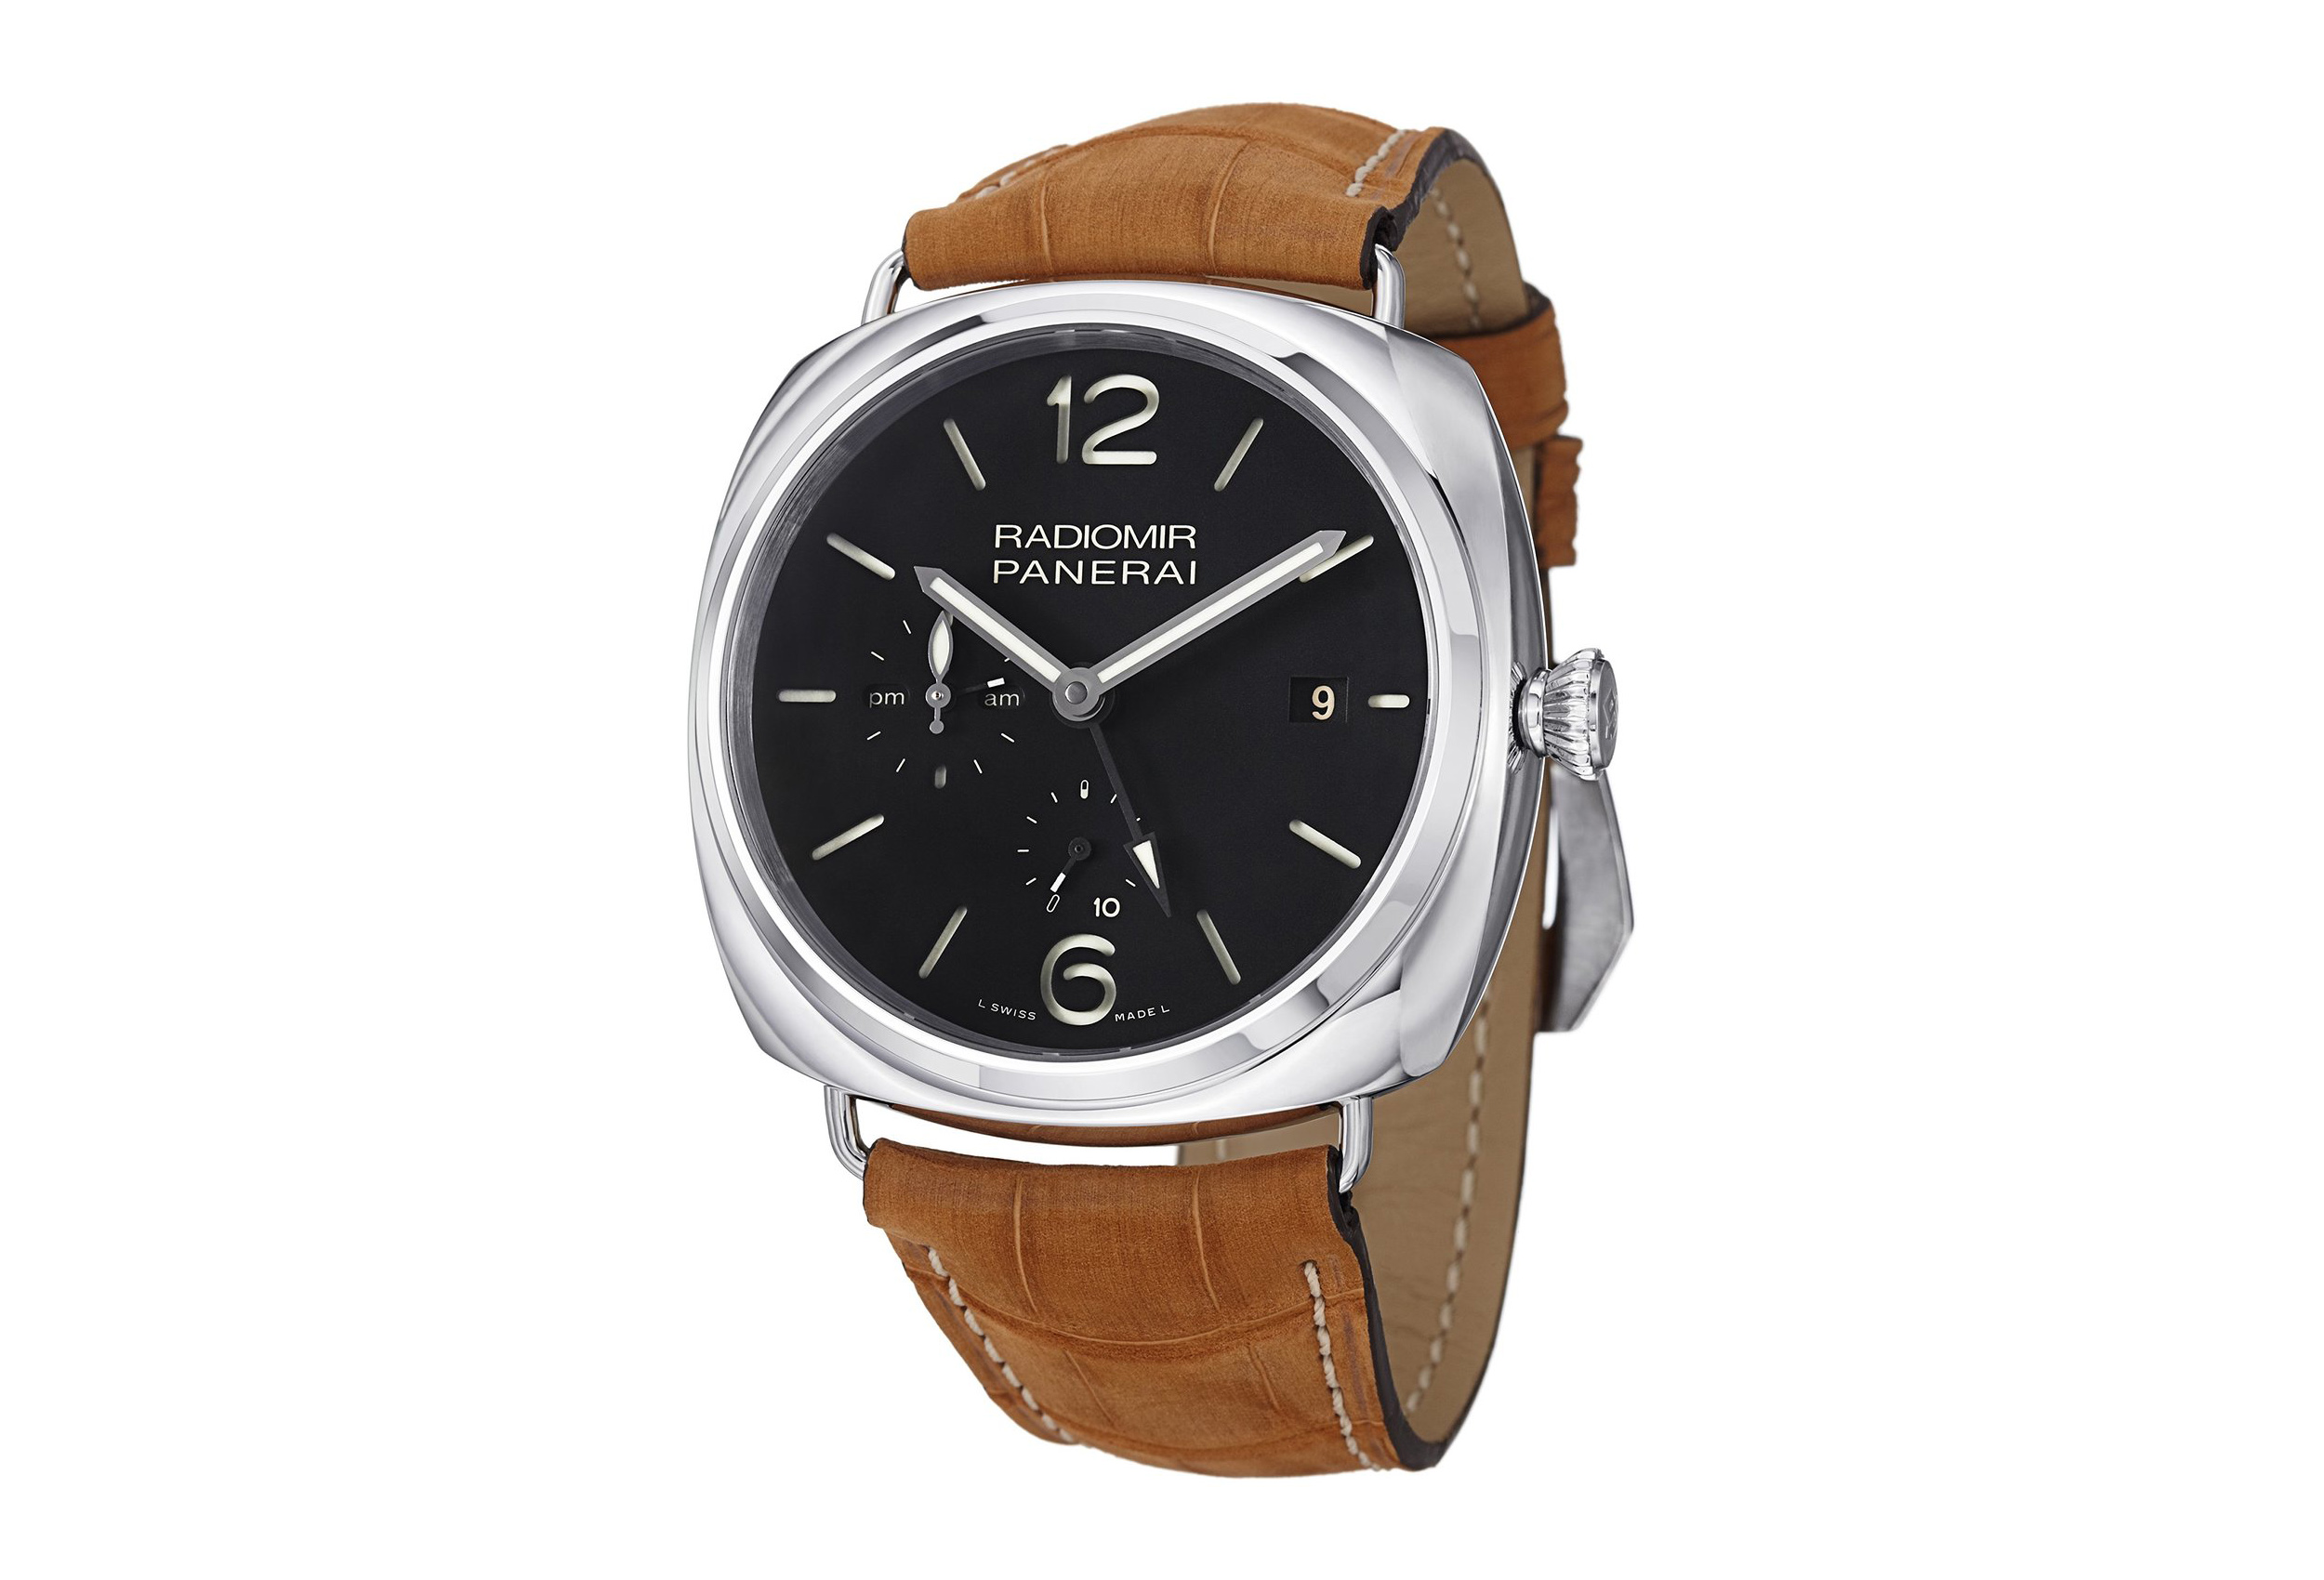 PHOTO: Pictured is a Panerai Radiomir 10 Days priced at $9,395.00. 